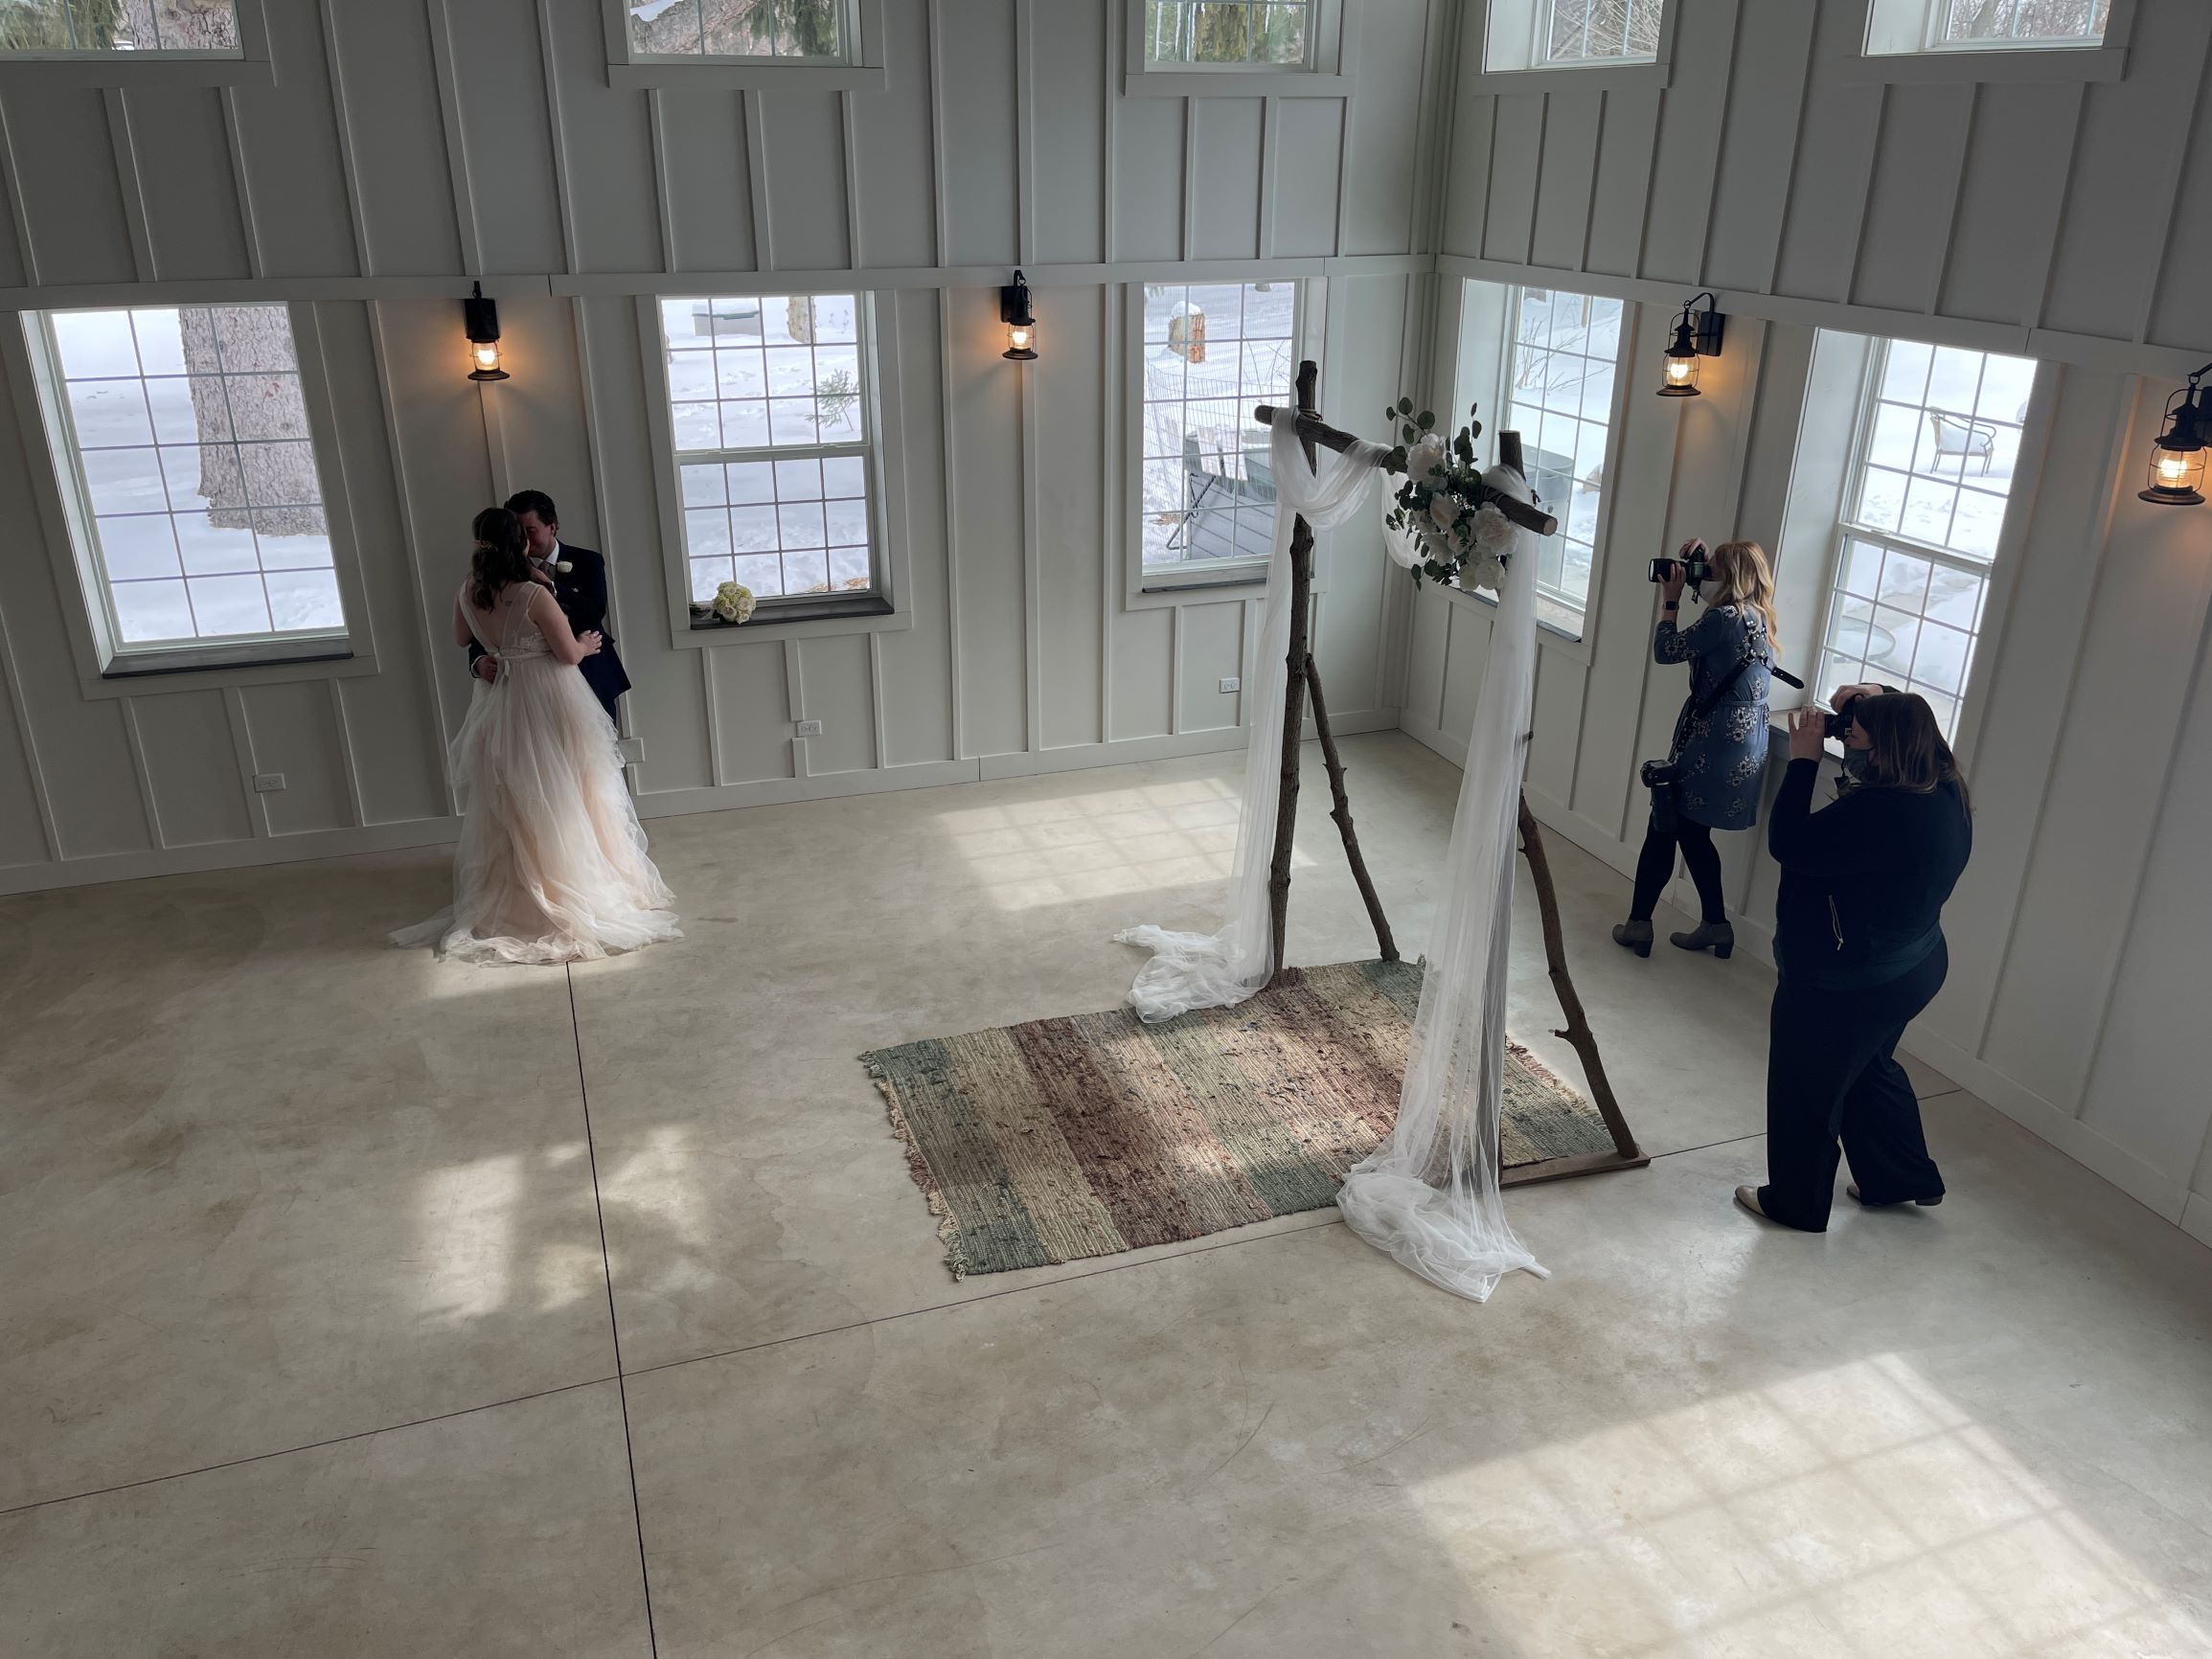 Shot from the loft, a photographer takes pictures of a couple on their wedding day.